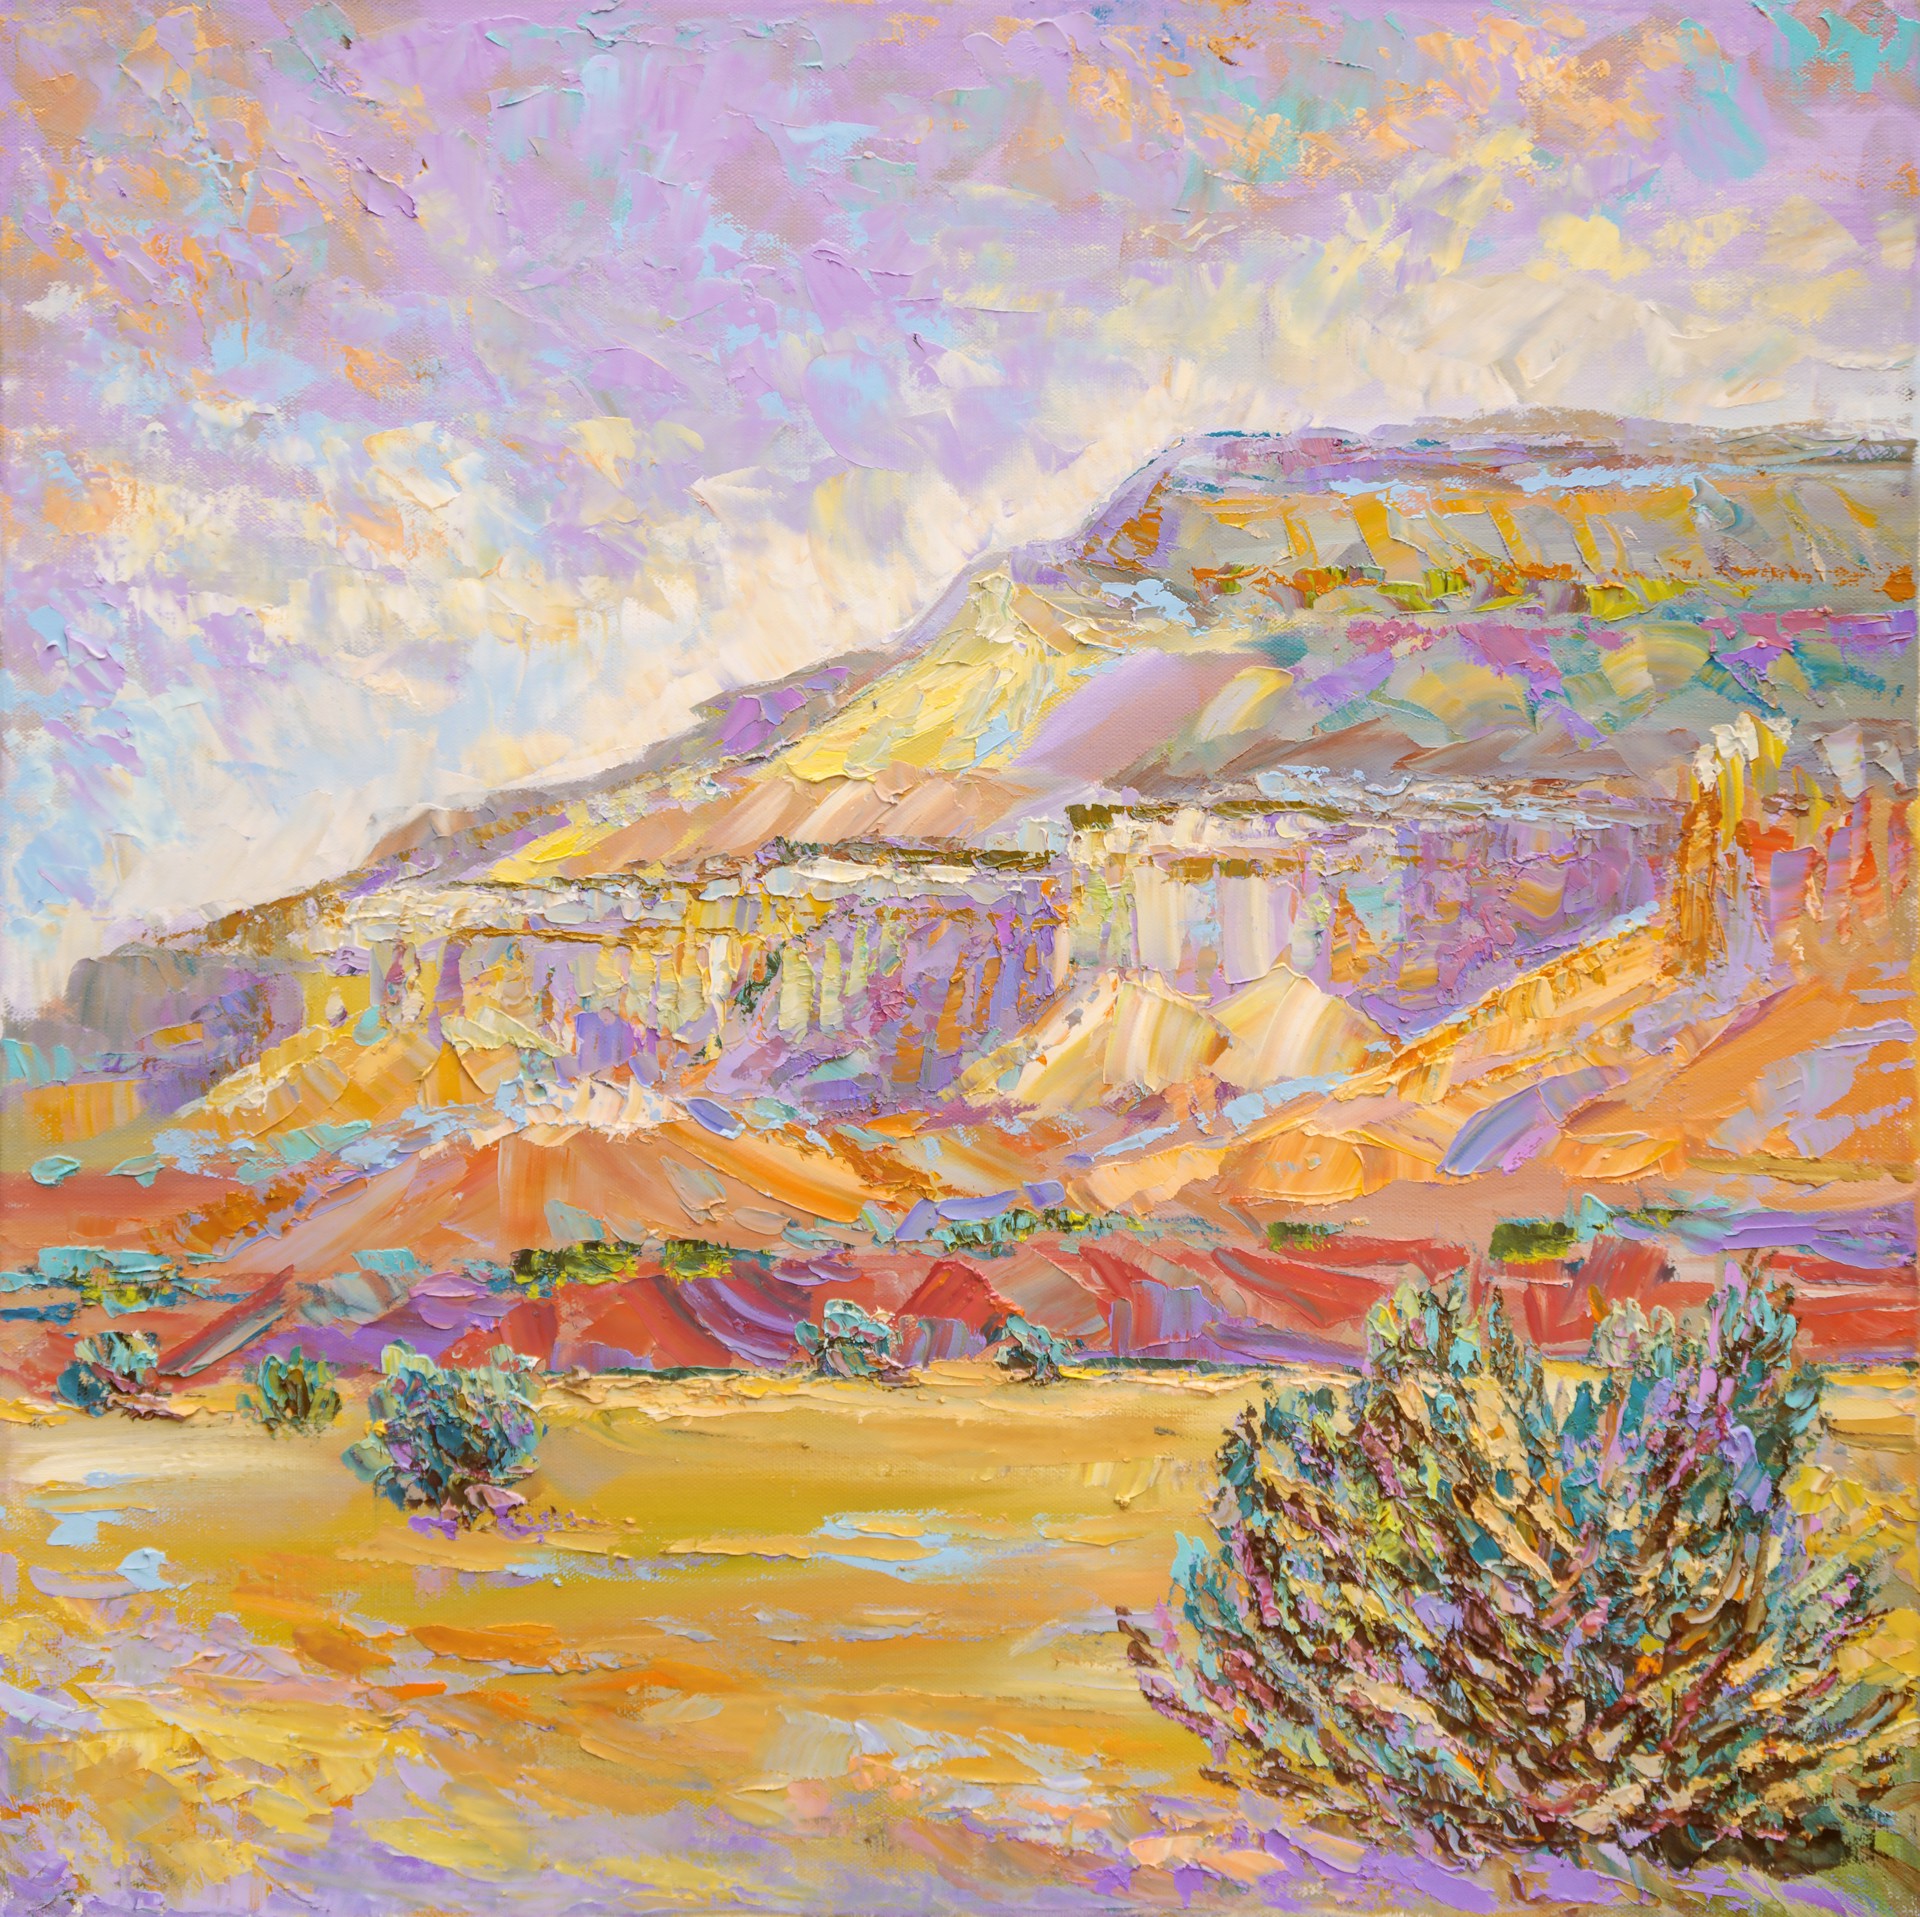 "Faraway Mesa, Nearby Ghost Ranch" by Barbara Meikle